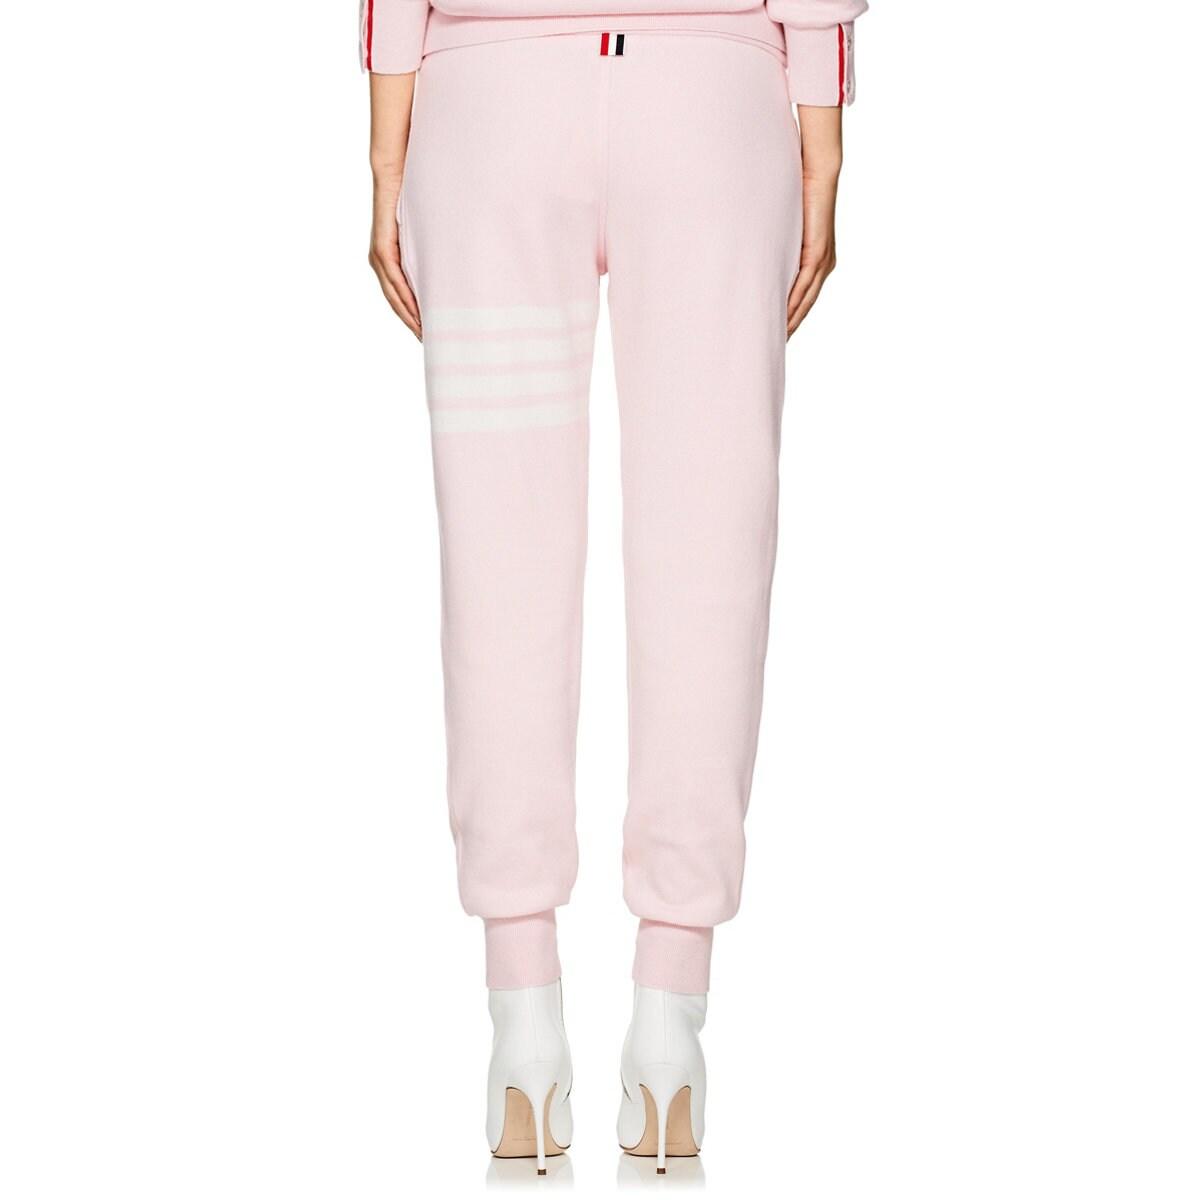 Thom Browne Block-striped Cashmere-blend Jogger Pants in Pink - Lyst